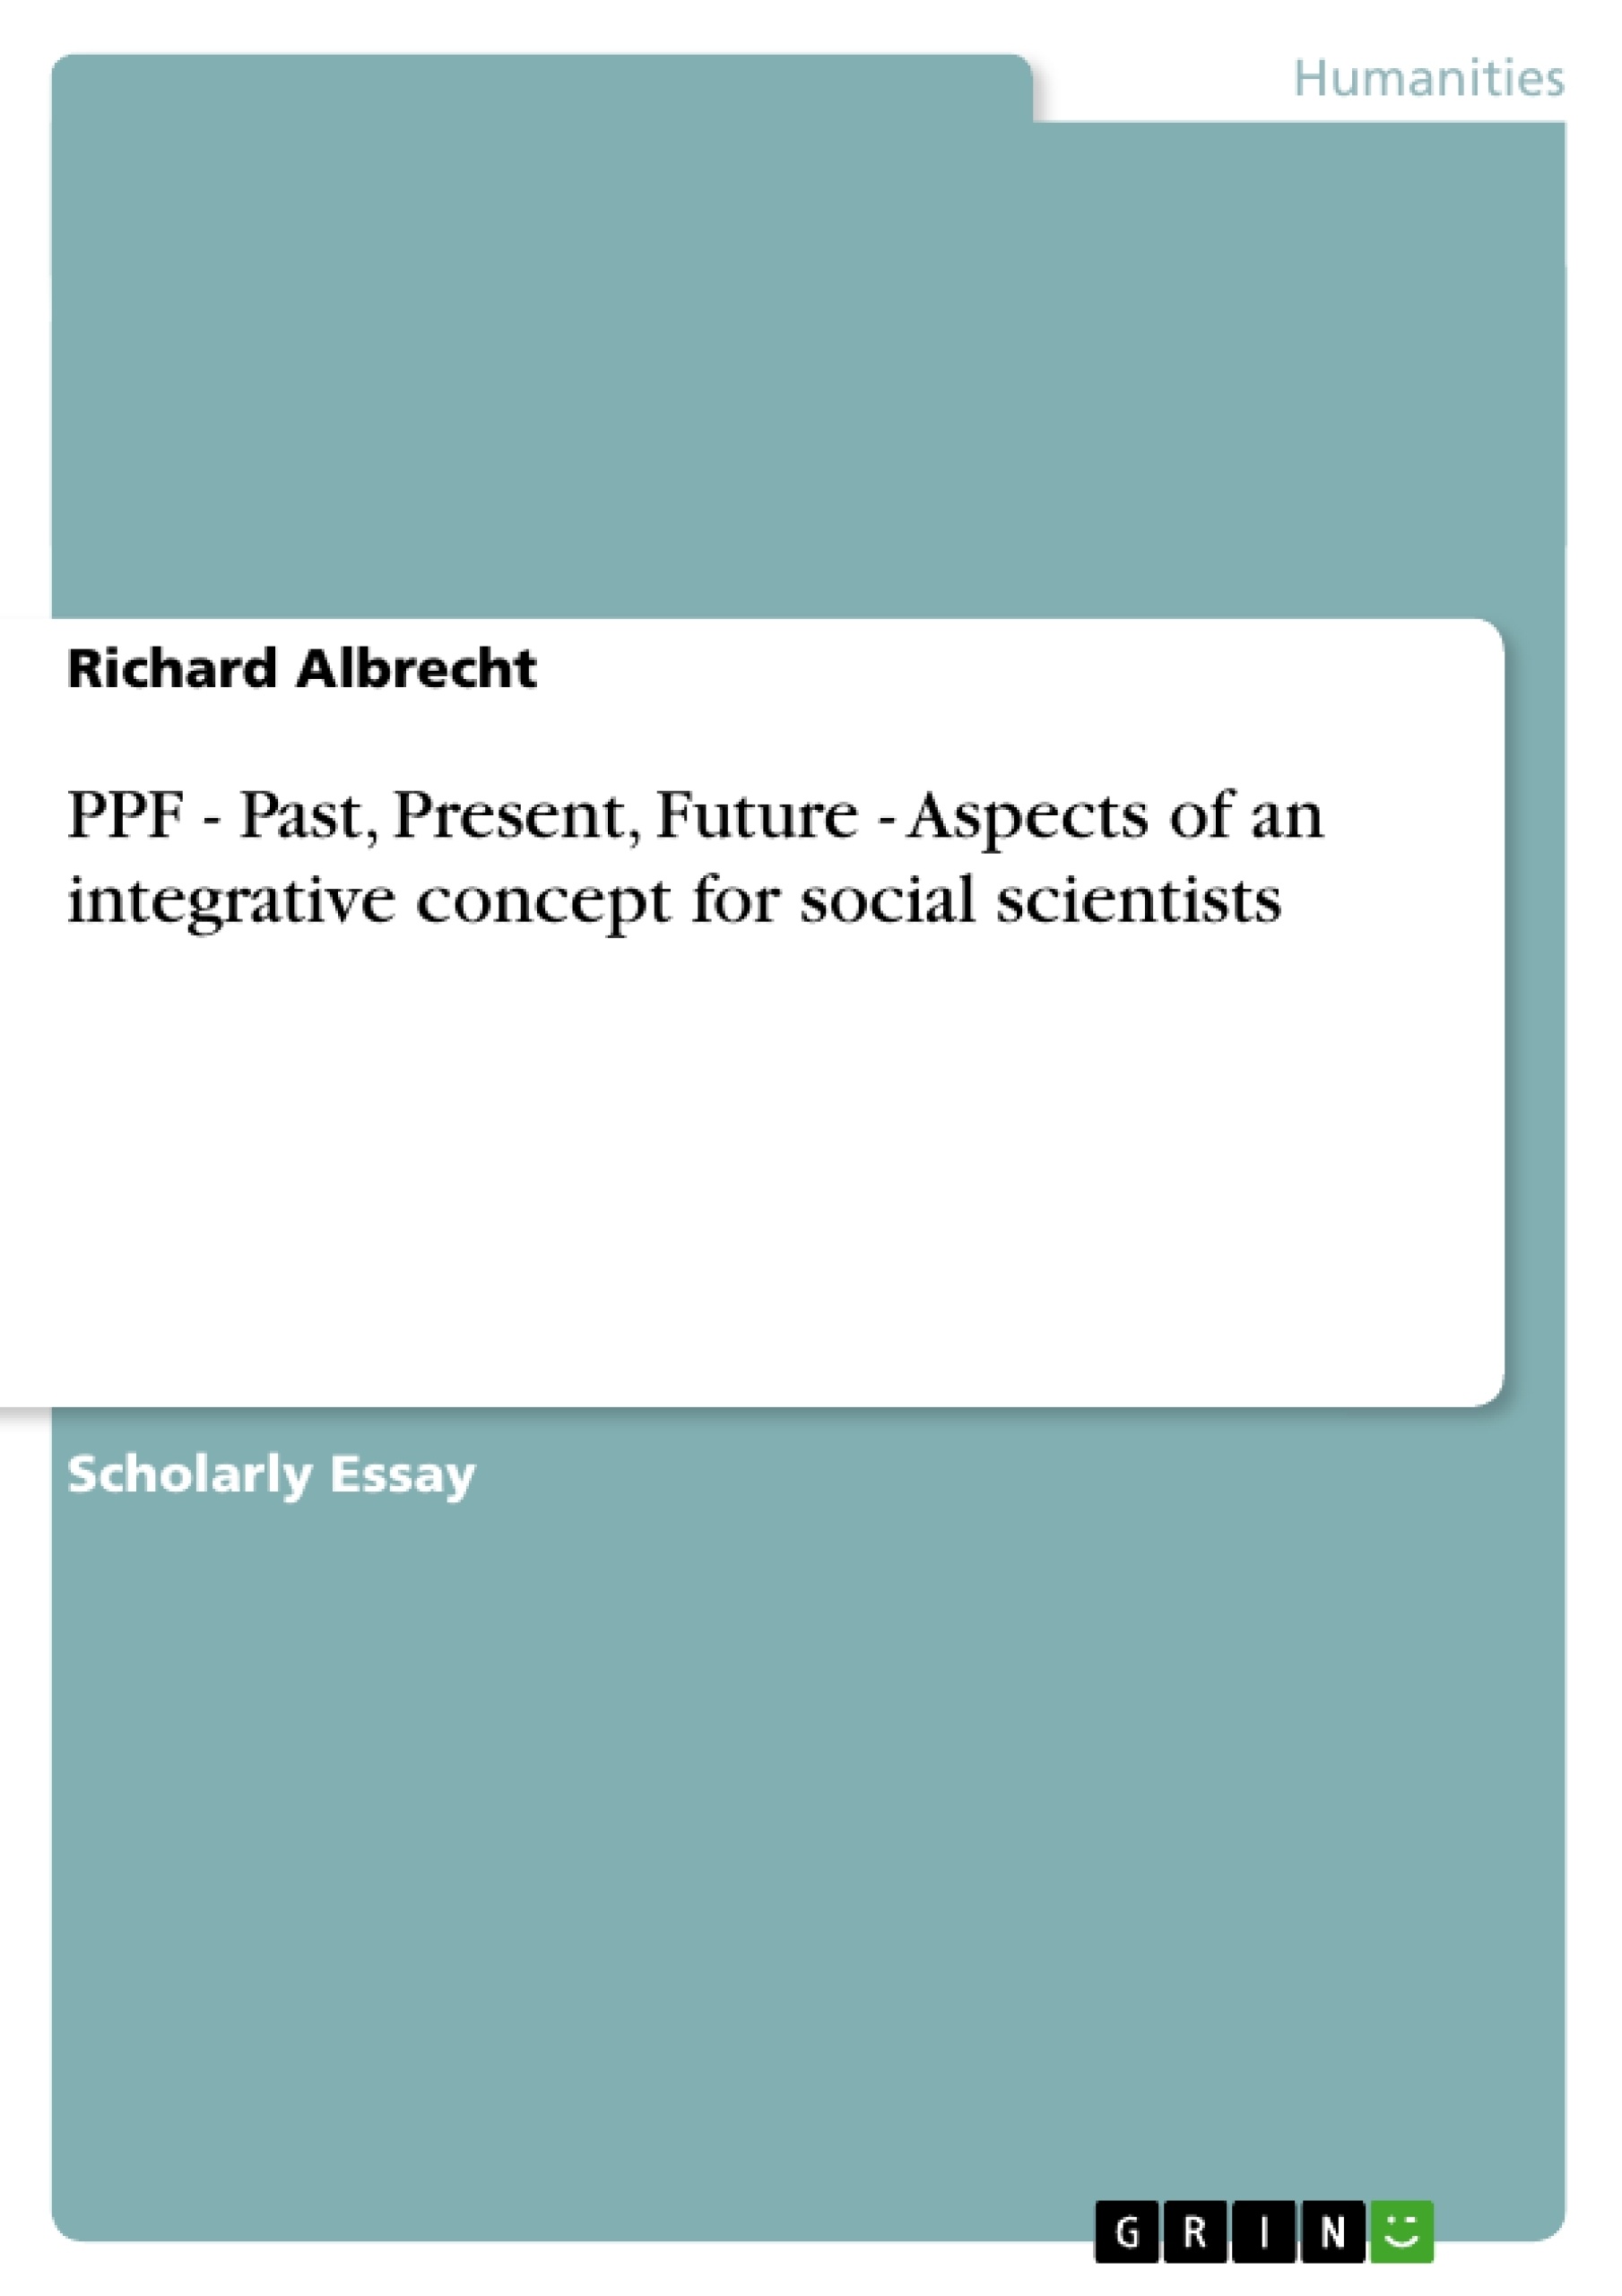 Title: PPF - Past, Present, Future - Aspects of an integrative concept for social scientists